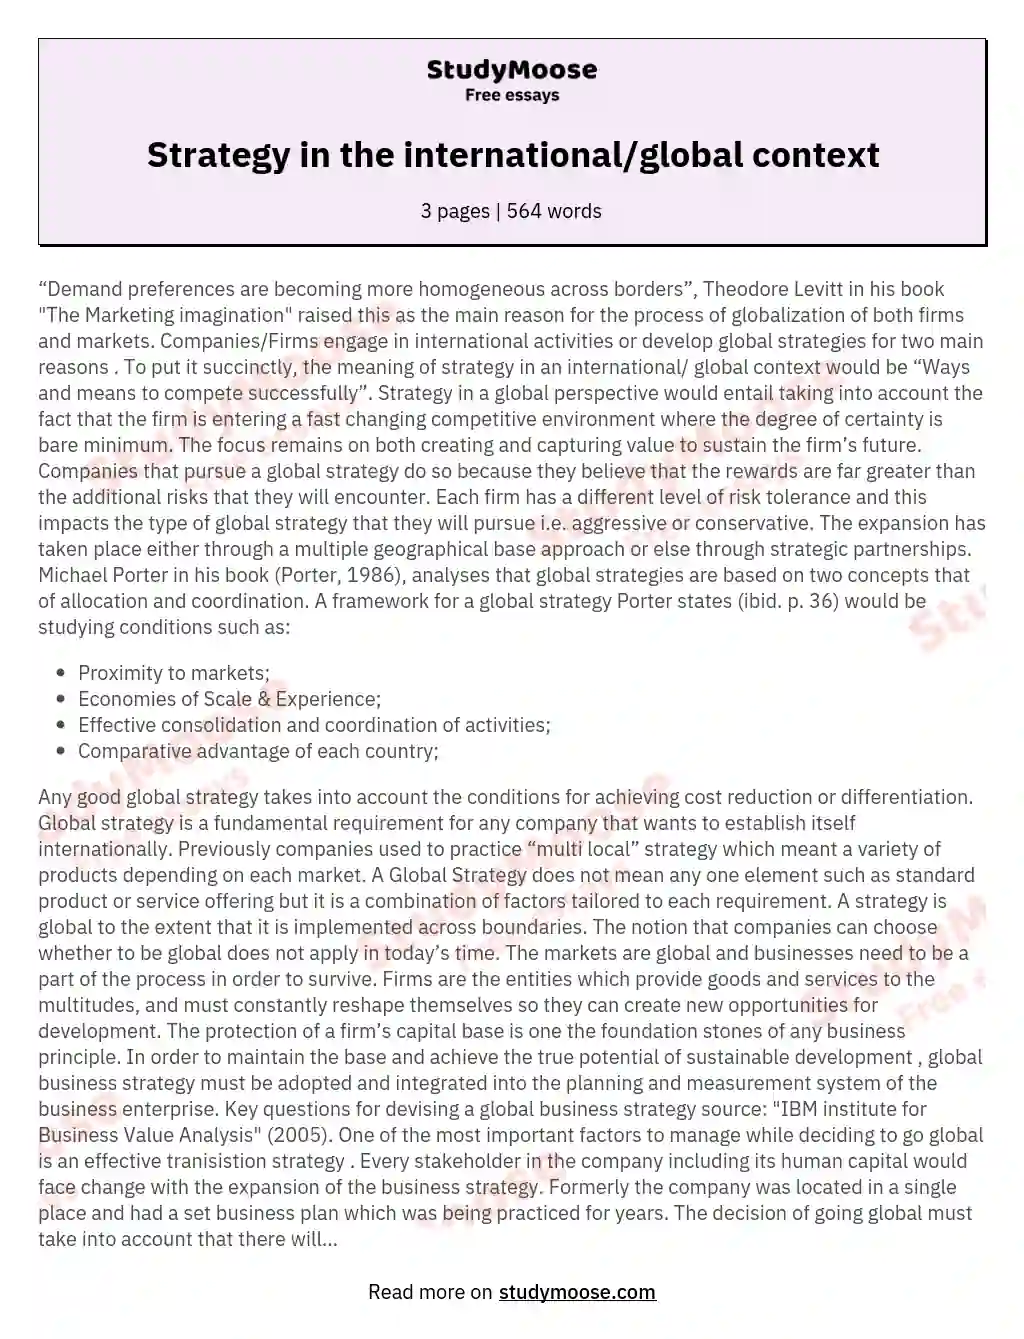 Strategy in the international/global context essay